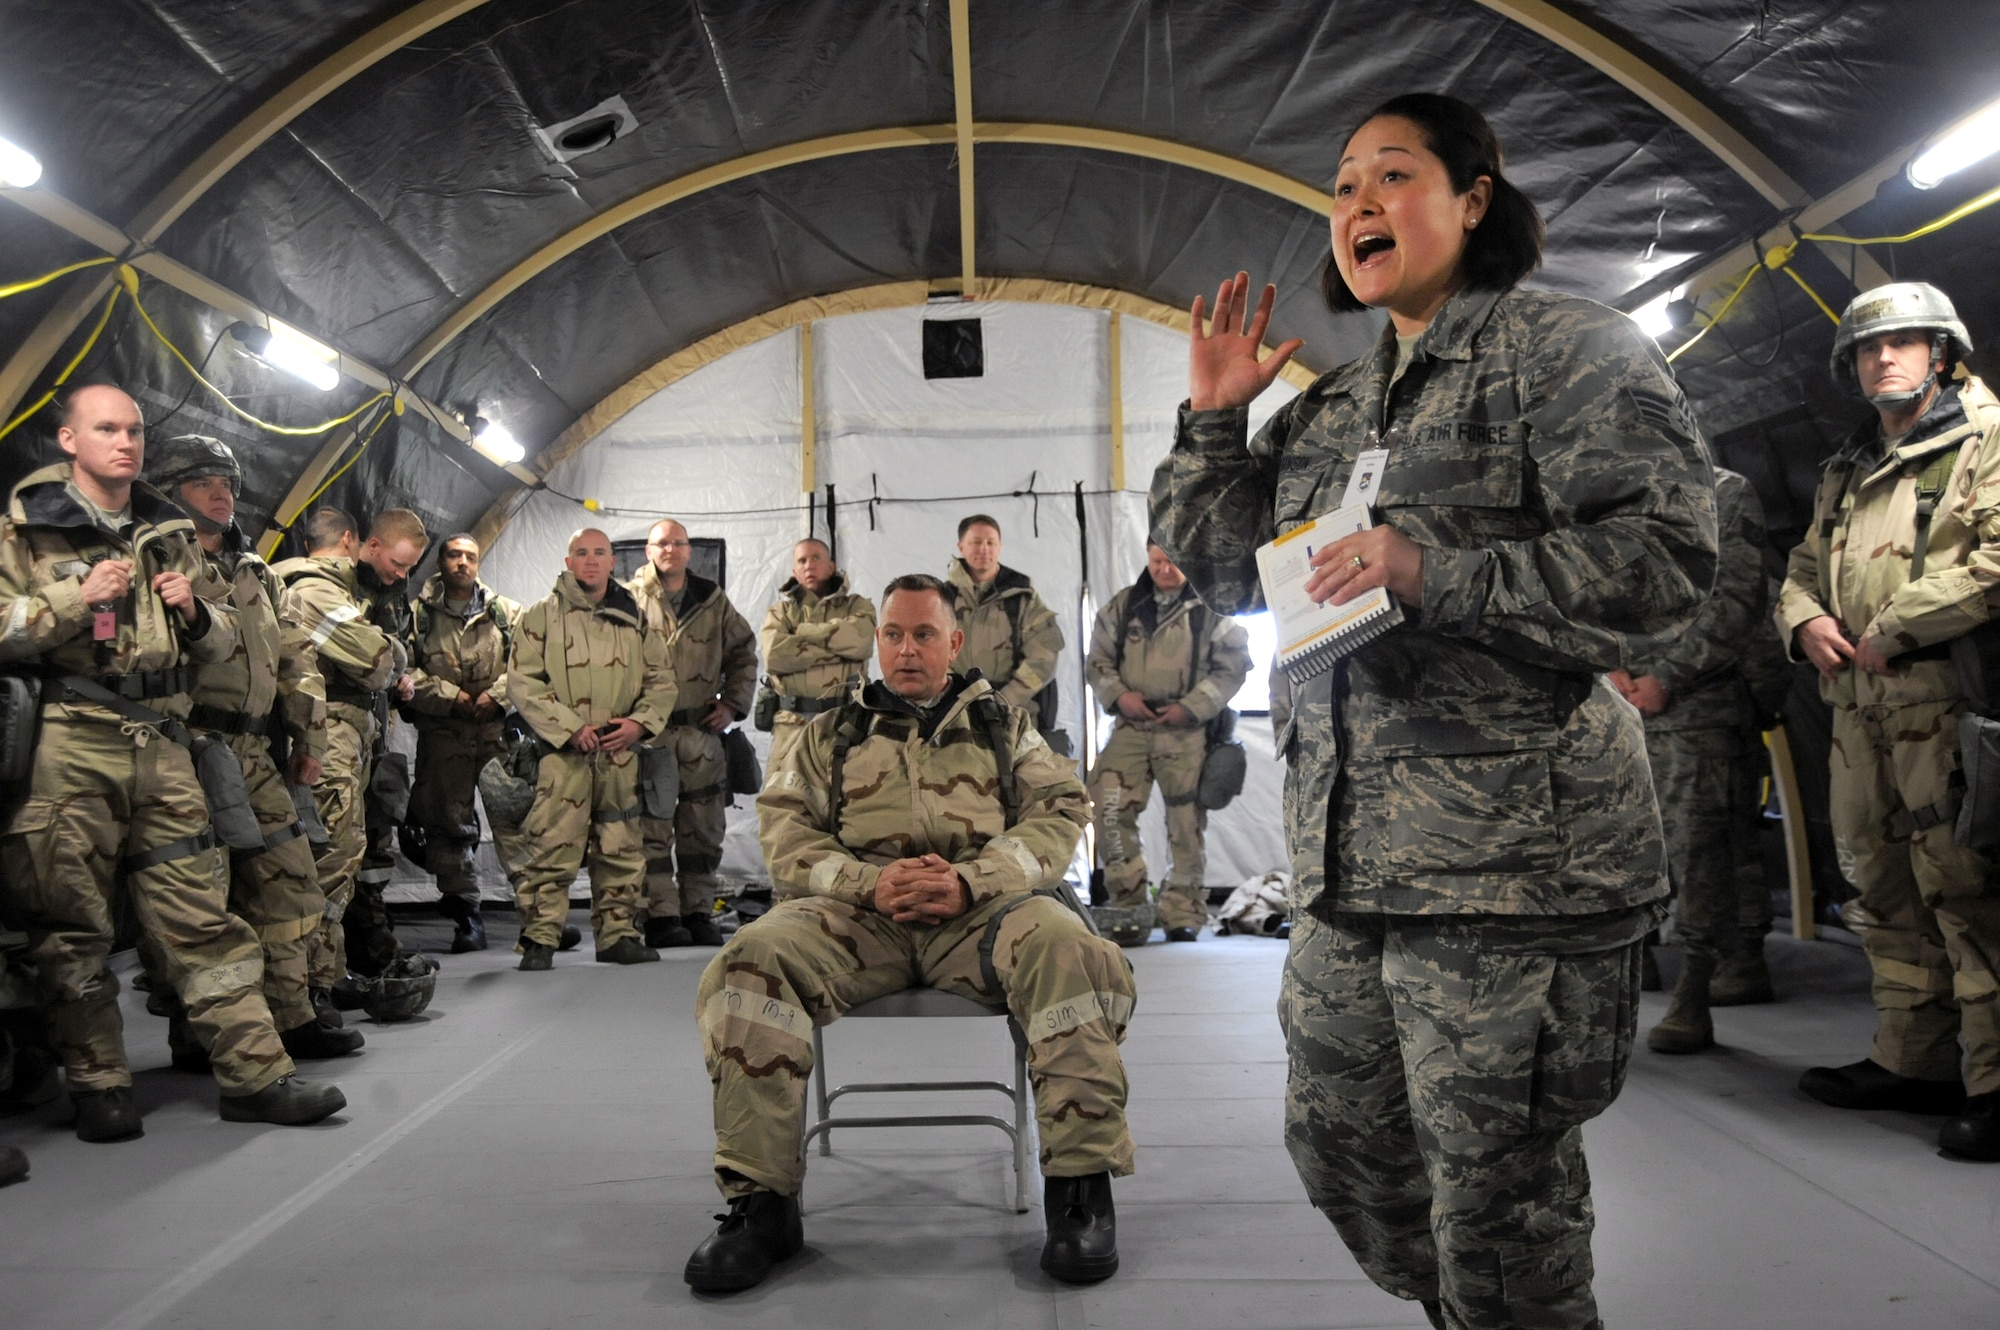 Oregon Senior Airman Crystal Atkinson, assigned to the 142nd Civil Engineer Squadron, instructs Airmen during the AEF Skills Rodeo, April 12, 2015, Portland Air National Guard Base, Ore. (U.S. Air National Guard photo by Tech. Sgt. John Hughel, 142nd Fighter Wing Public Affairs/Release)